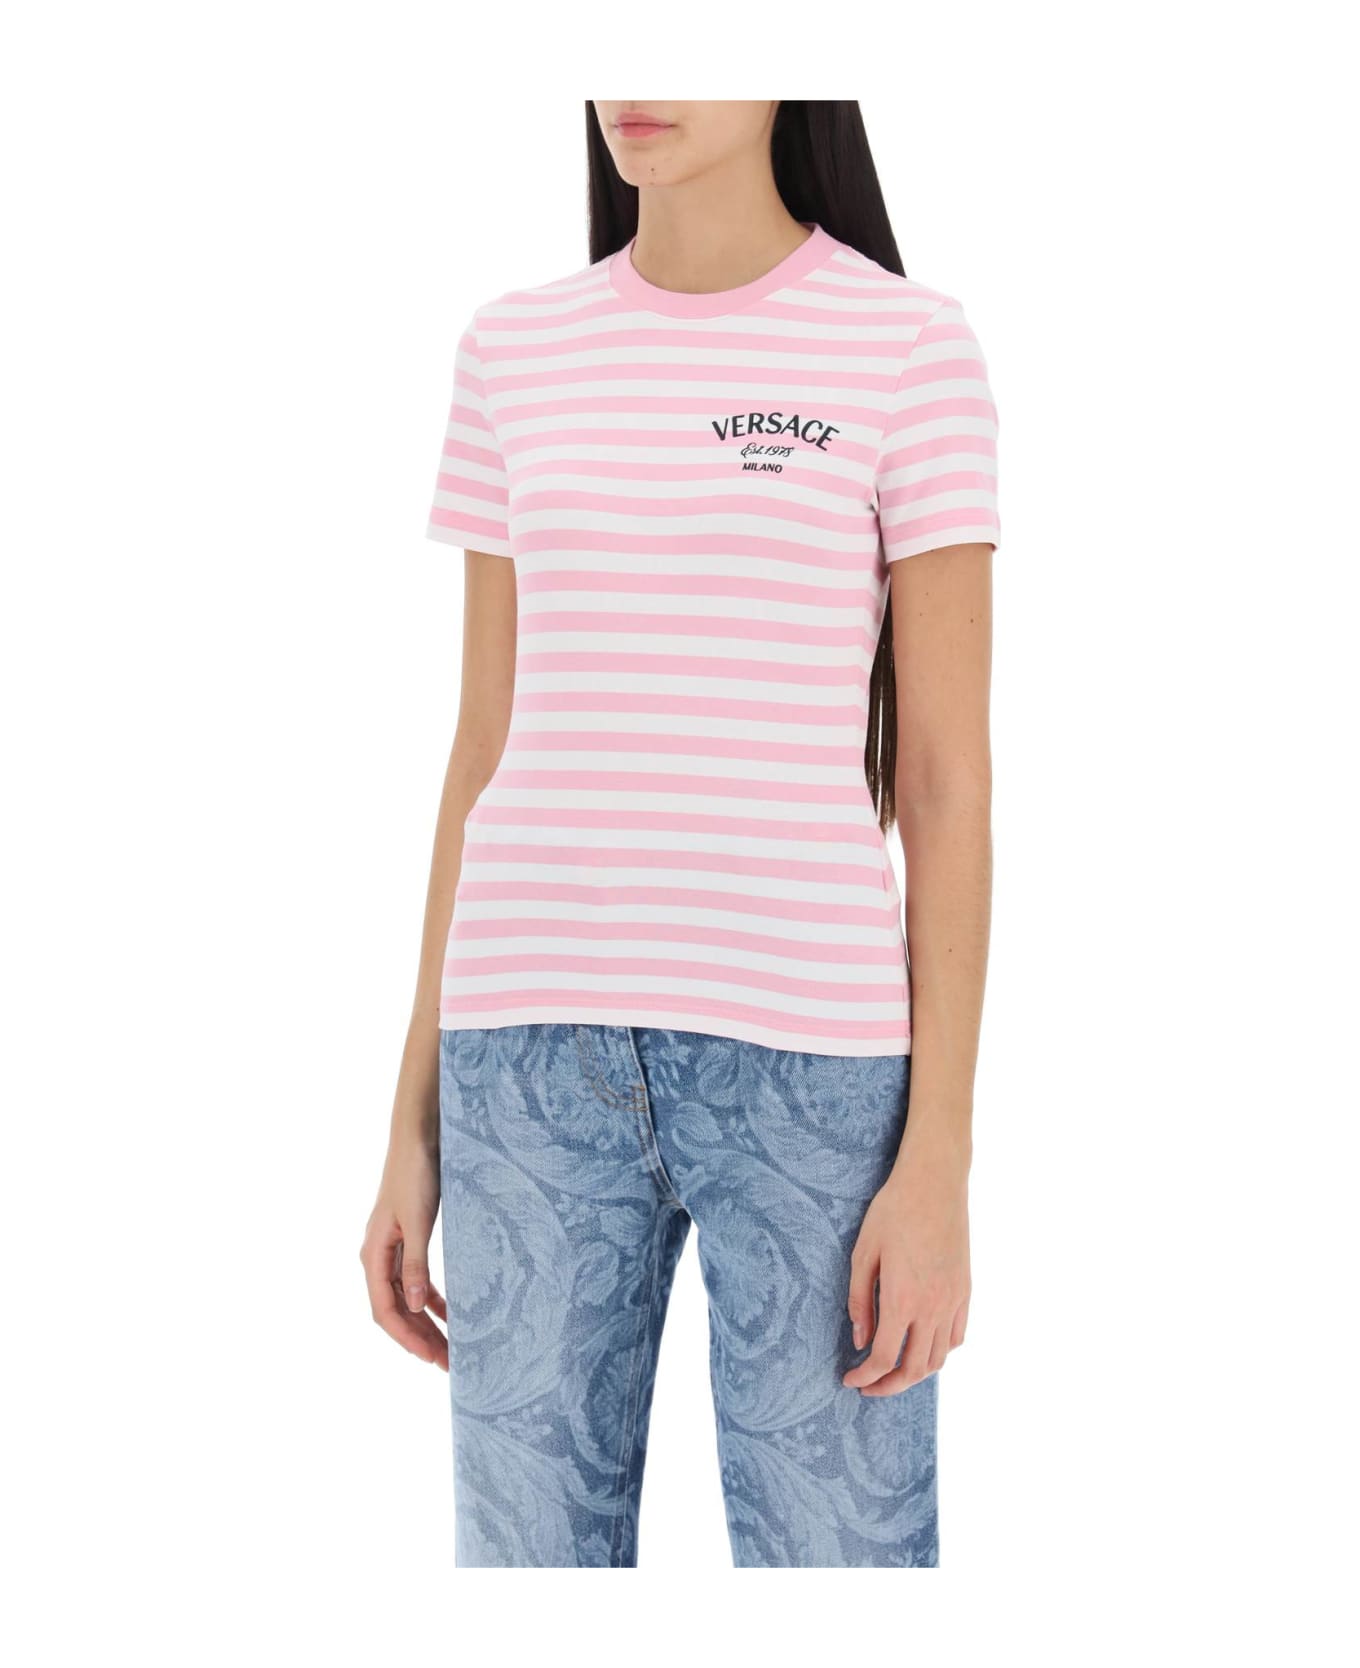 Versace Logo-embroidered Crewneck Striped T-shirt - WHITE PALE PINK MULTICOLO (White)